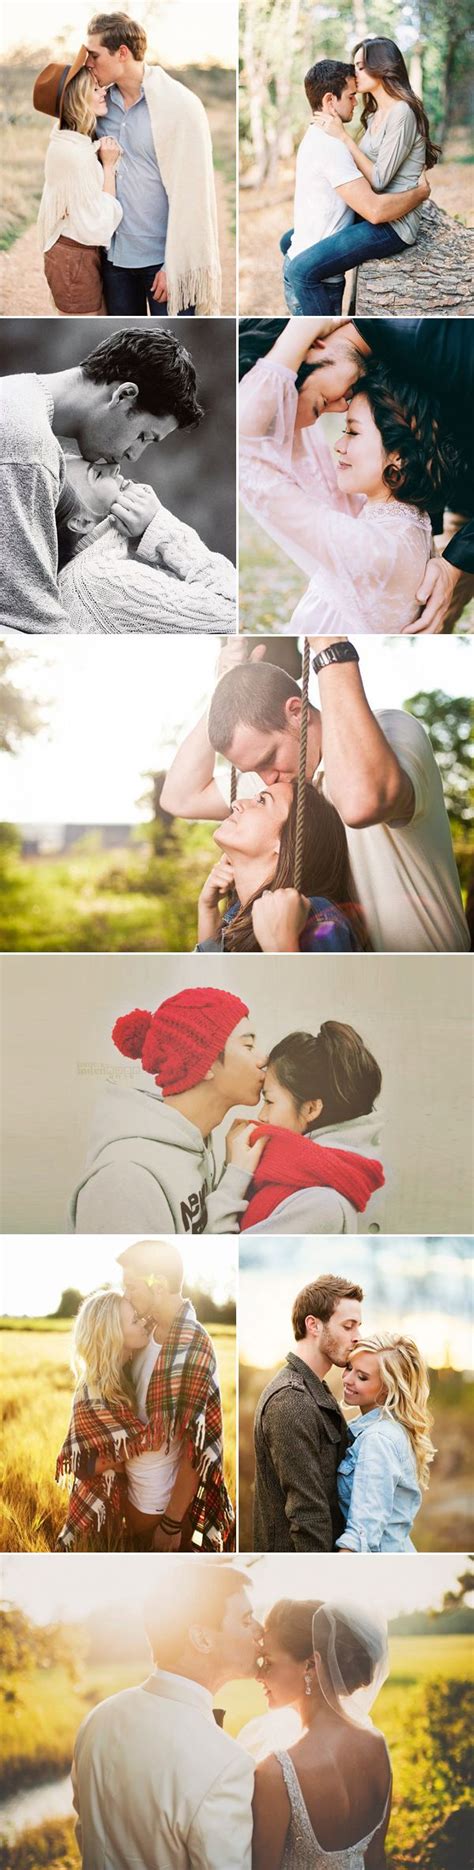 37 Must Try Cute Couple Photo Poses Praise Wedding Photo Poses For Couples Couple